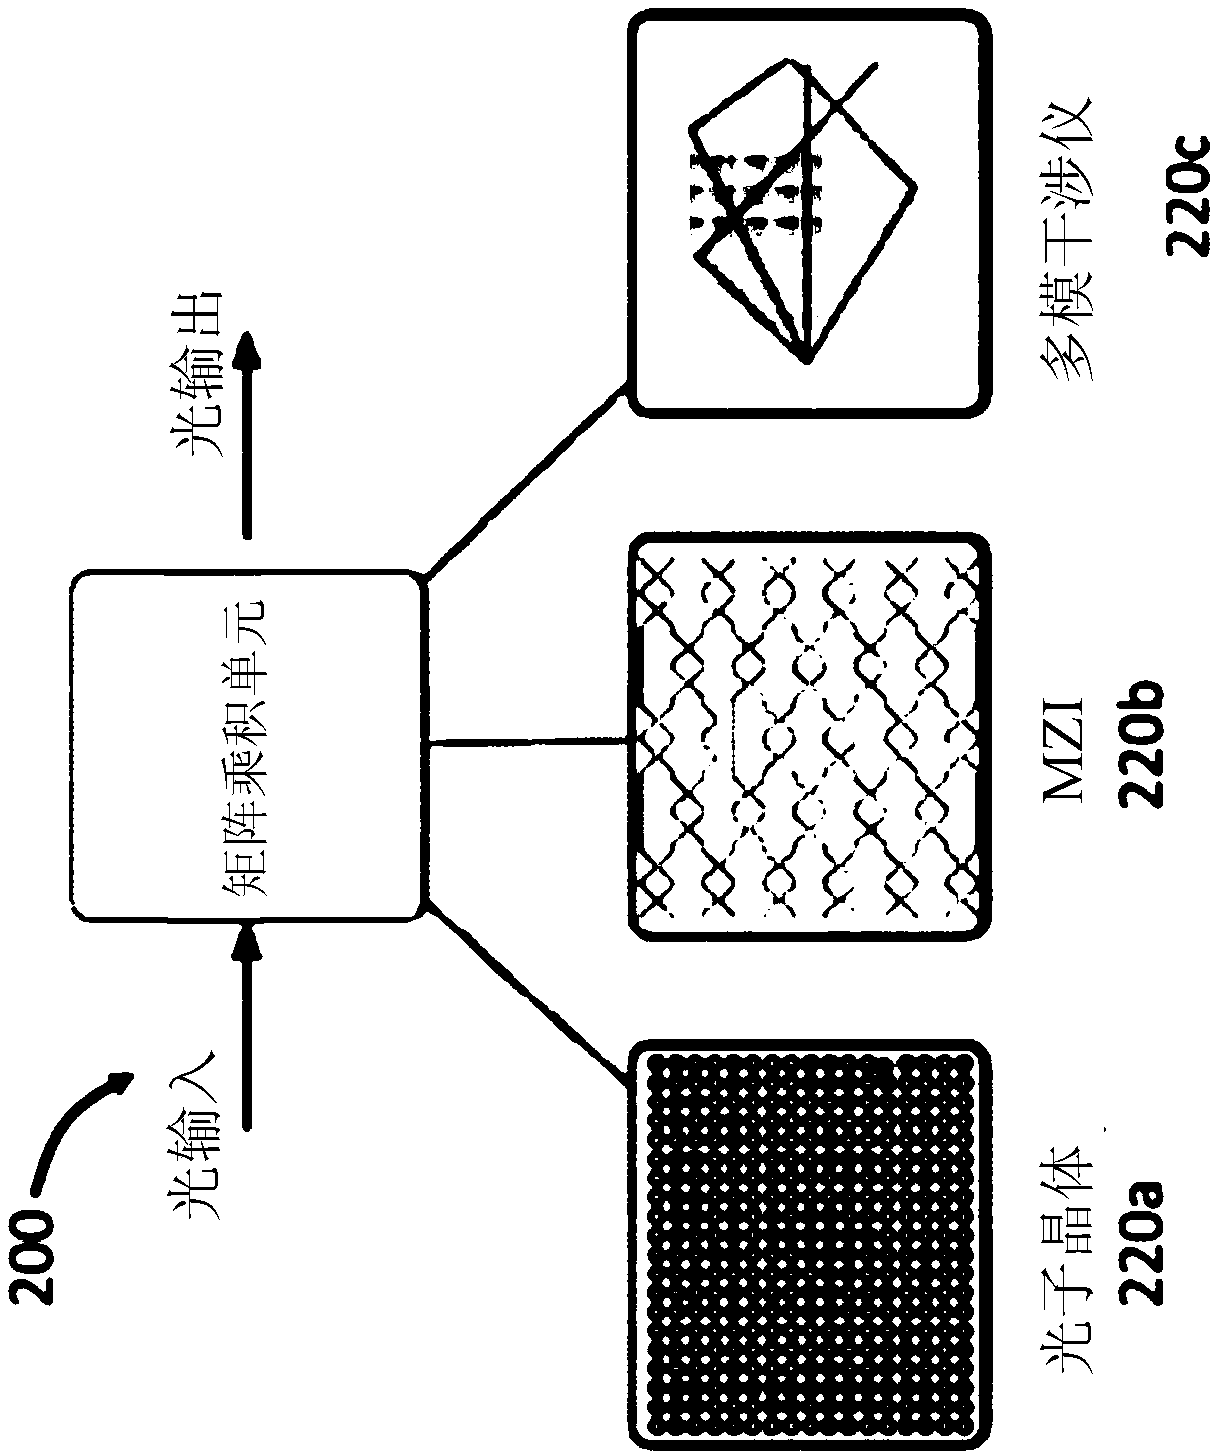 Apparatus and methods for optical neural network